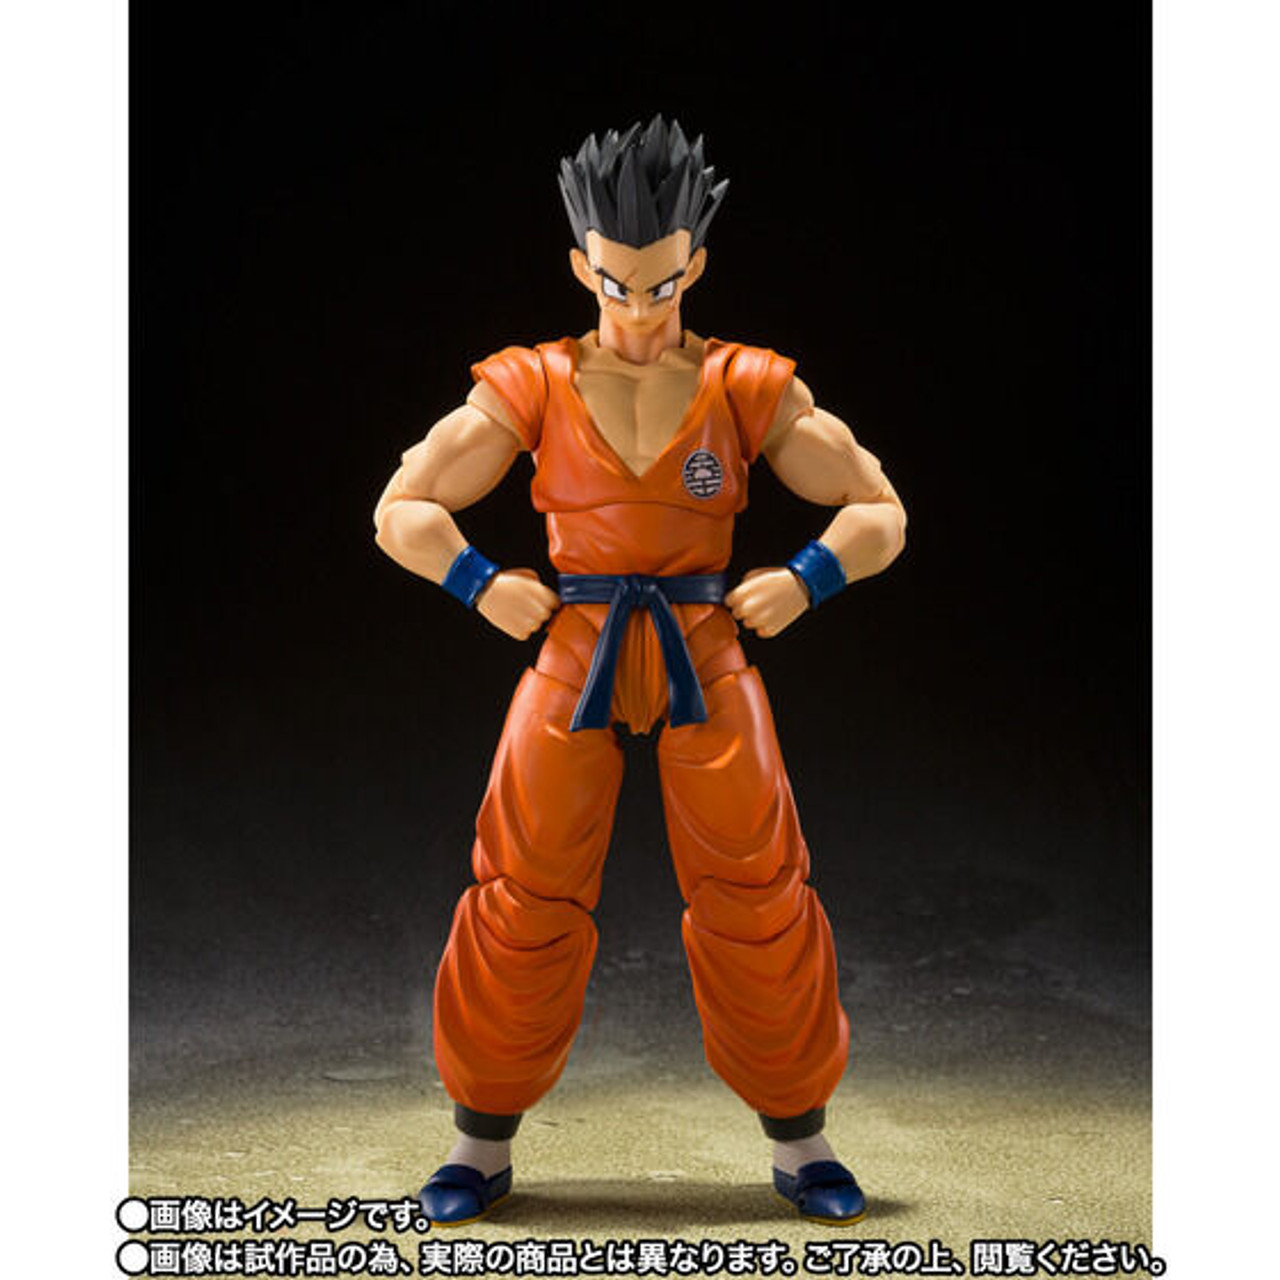 S.H.Figuarts Yamcha -Earth's Foremost Fighter- (Dragon Ball Z 